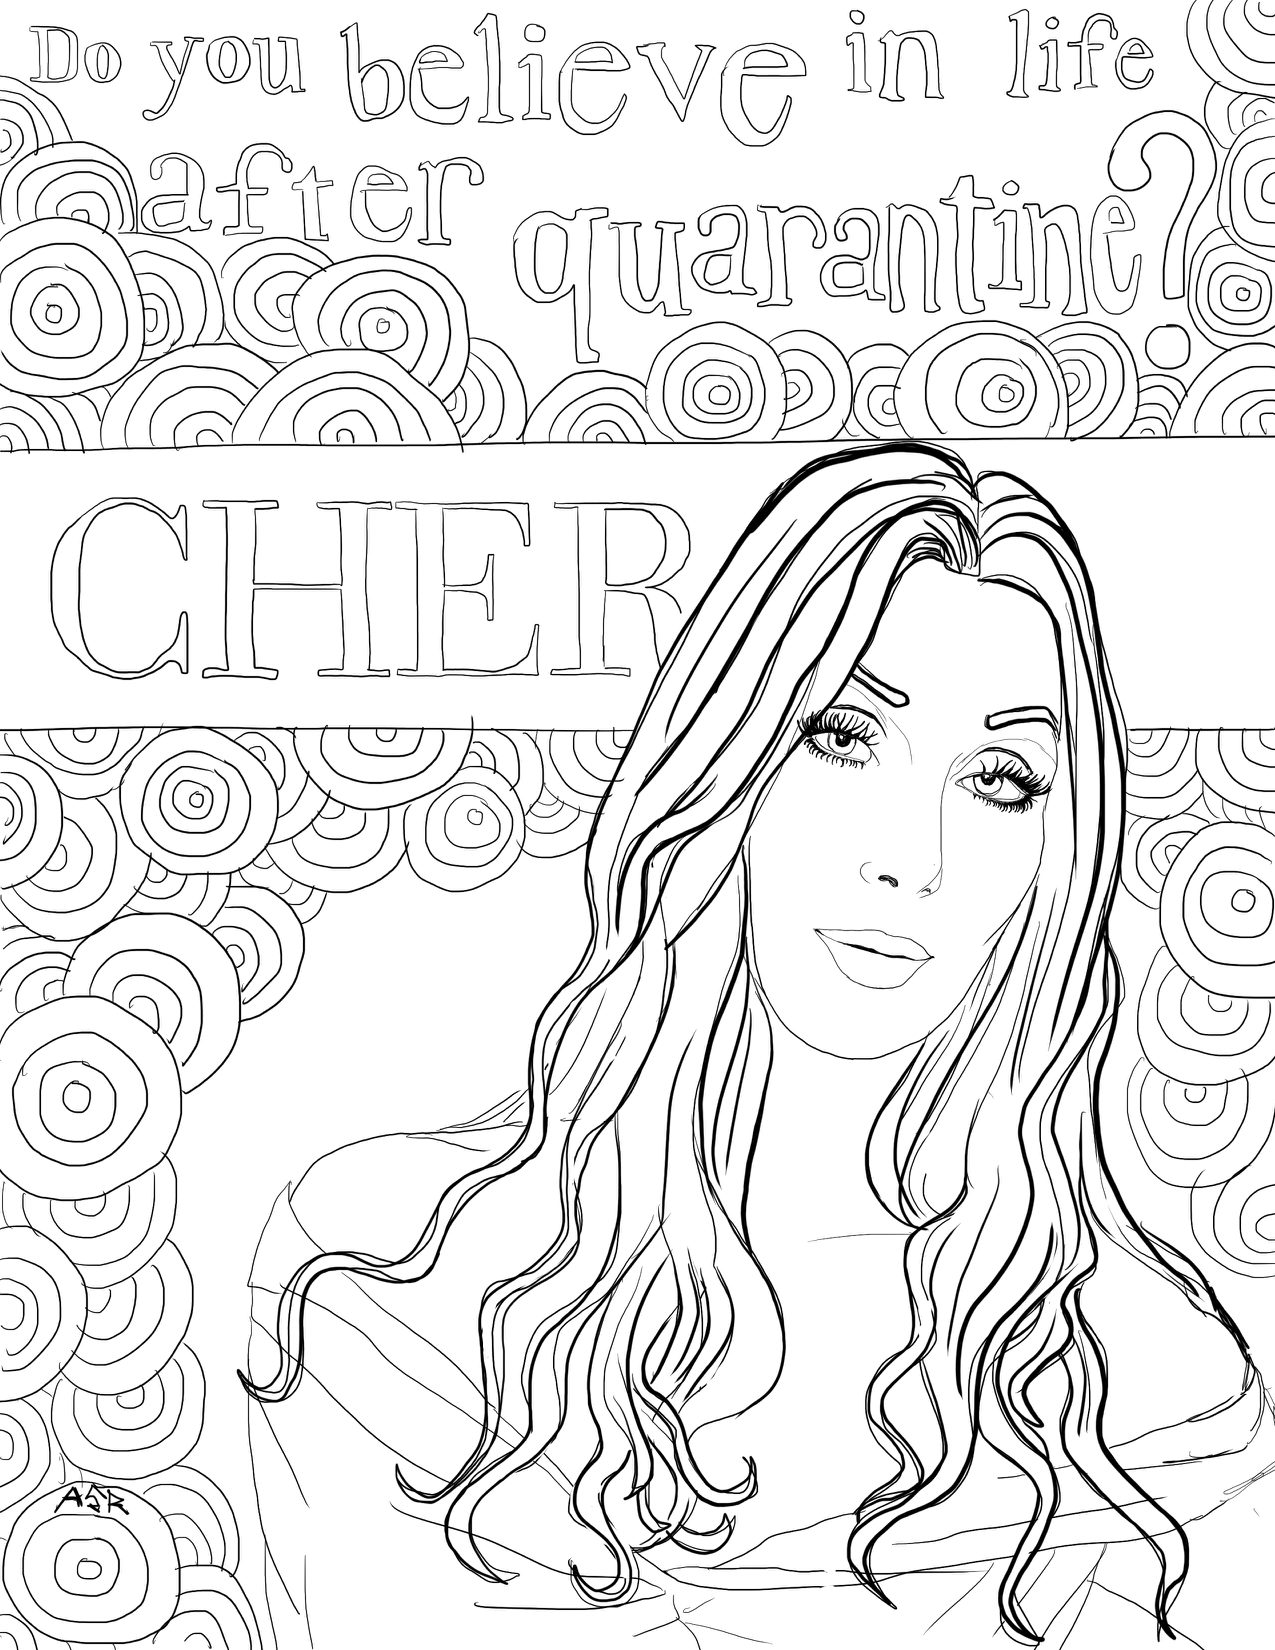 cher_coloringpage.png